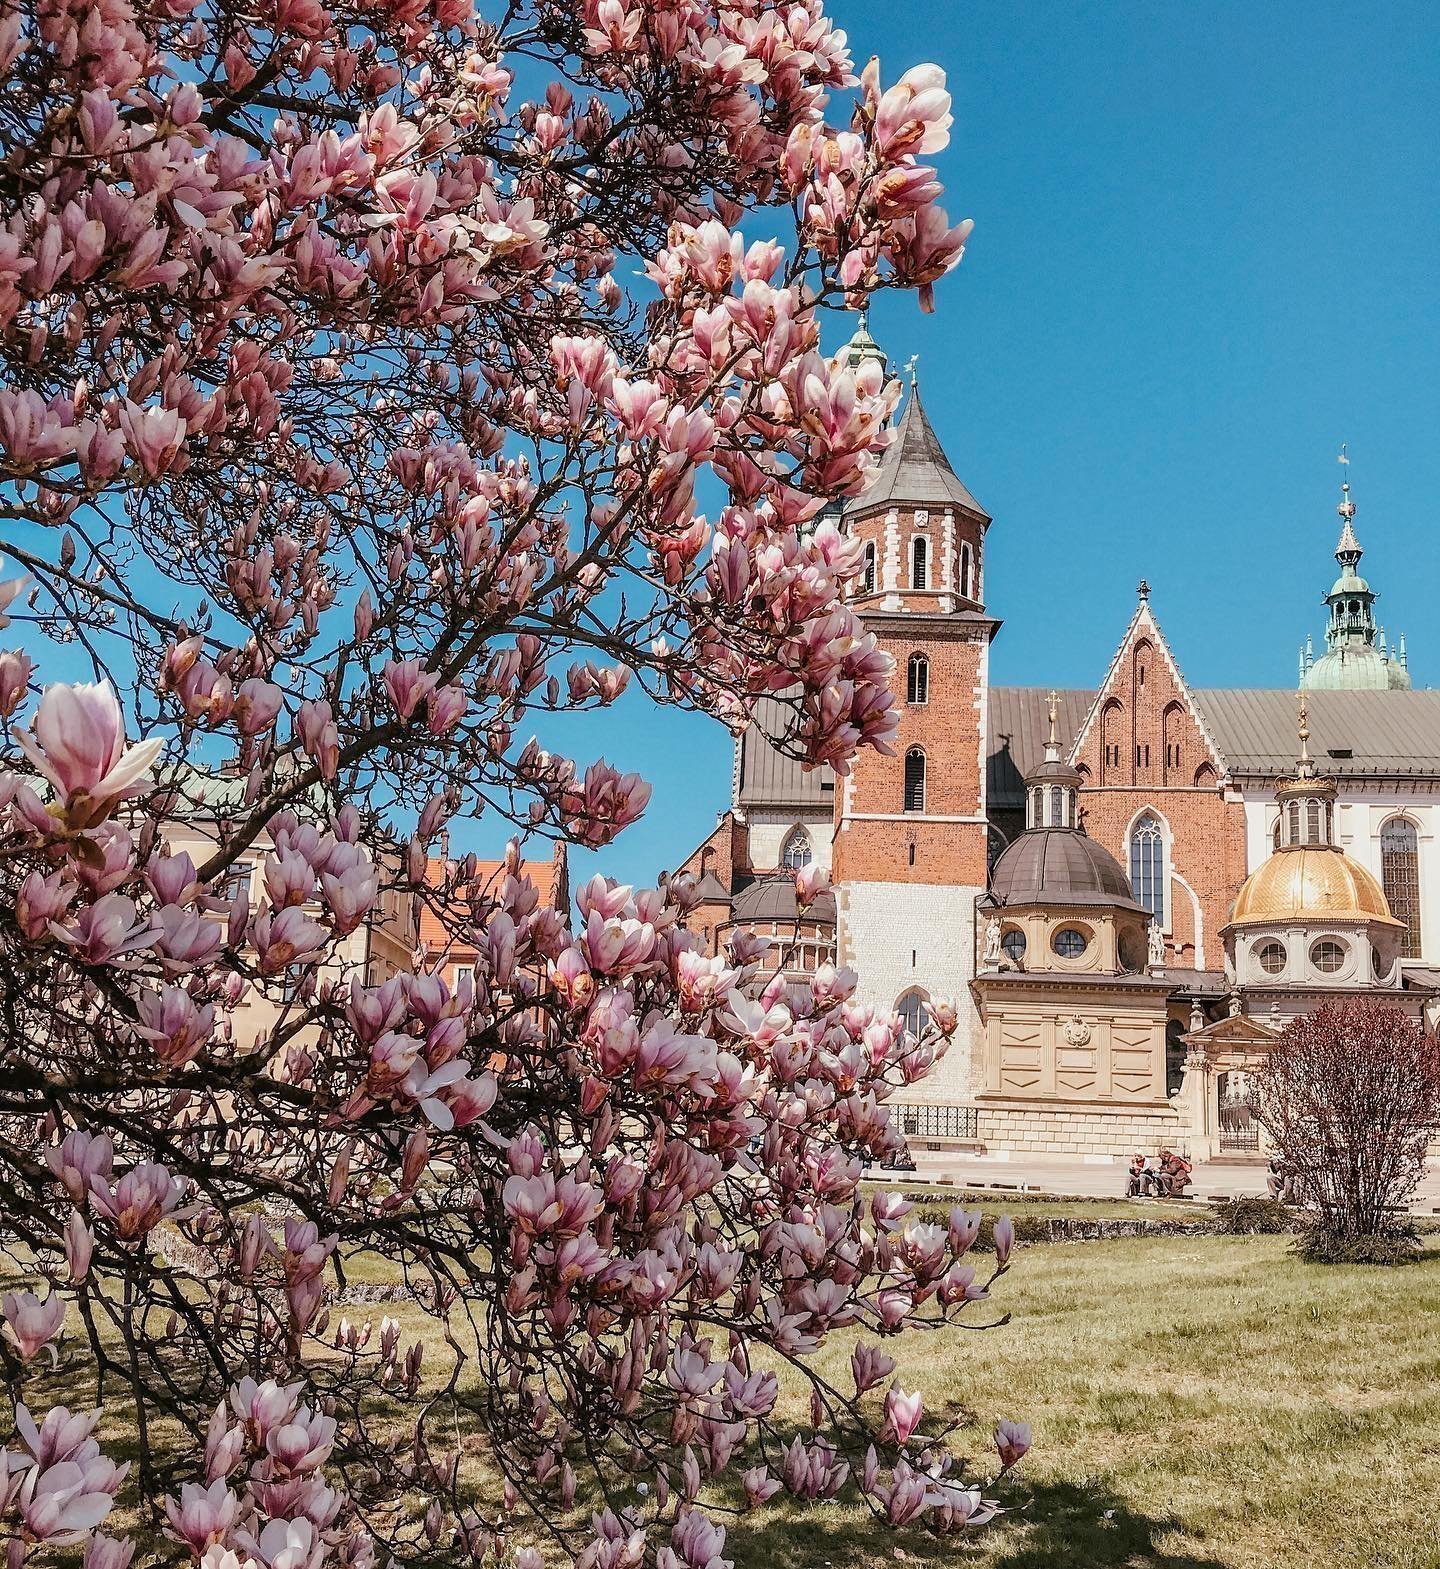 Wawel Castle and Royal Gardens